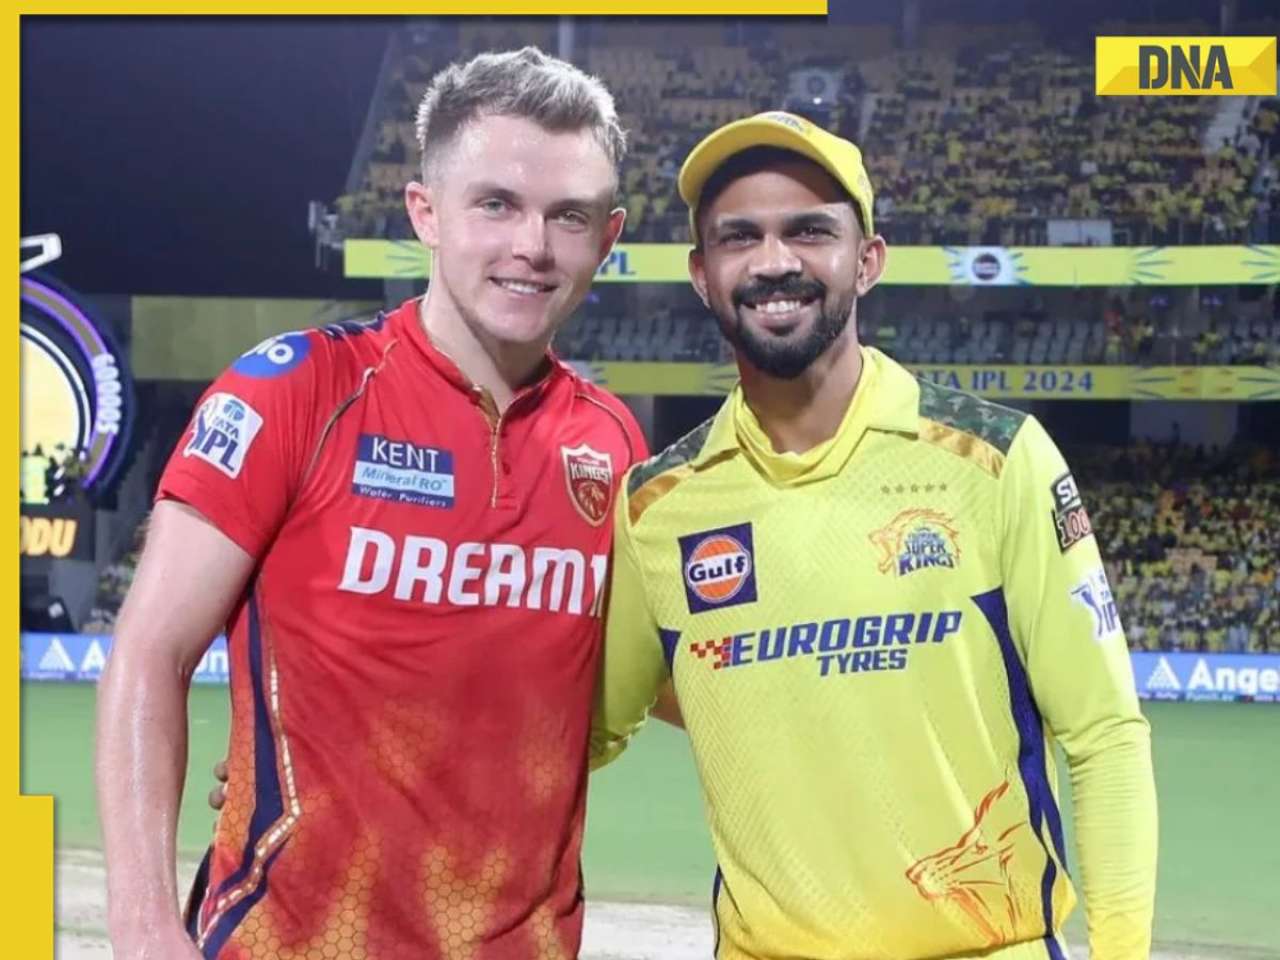 PBKS vs CSK IPL 2024: Predicted playing XI, live streaming details, weather and pitch report